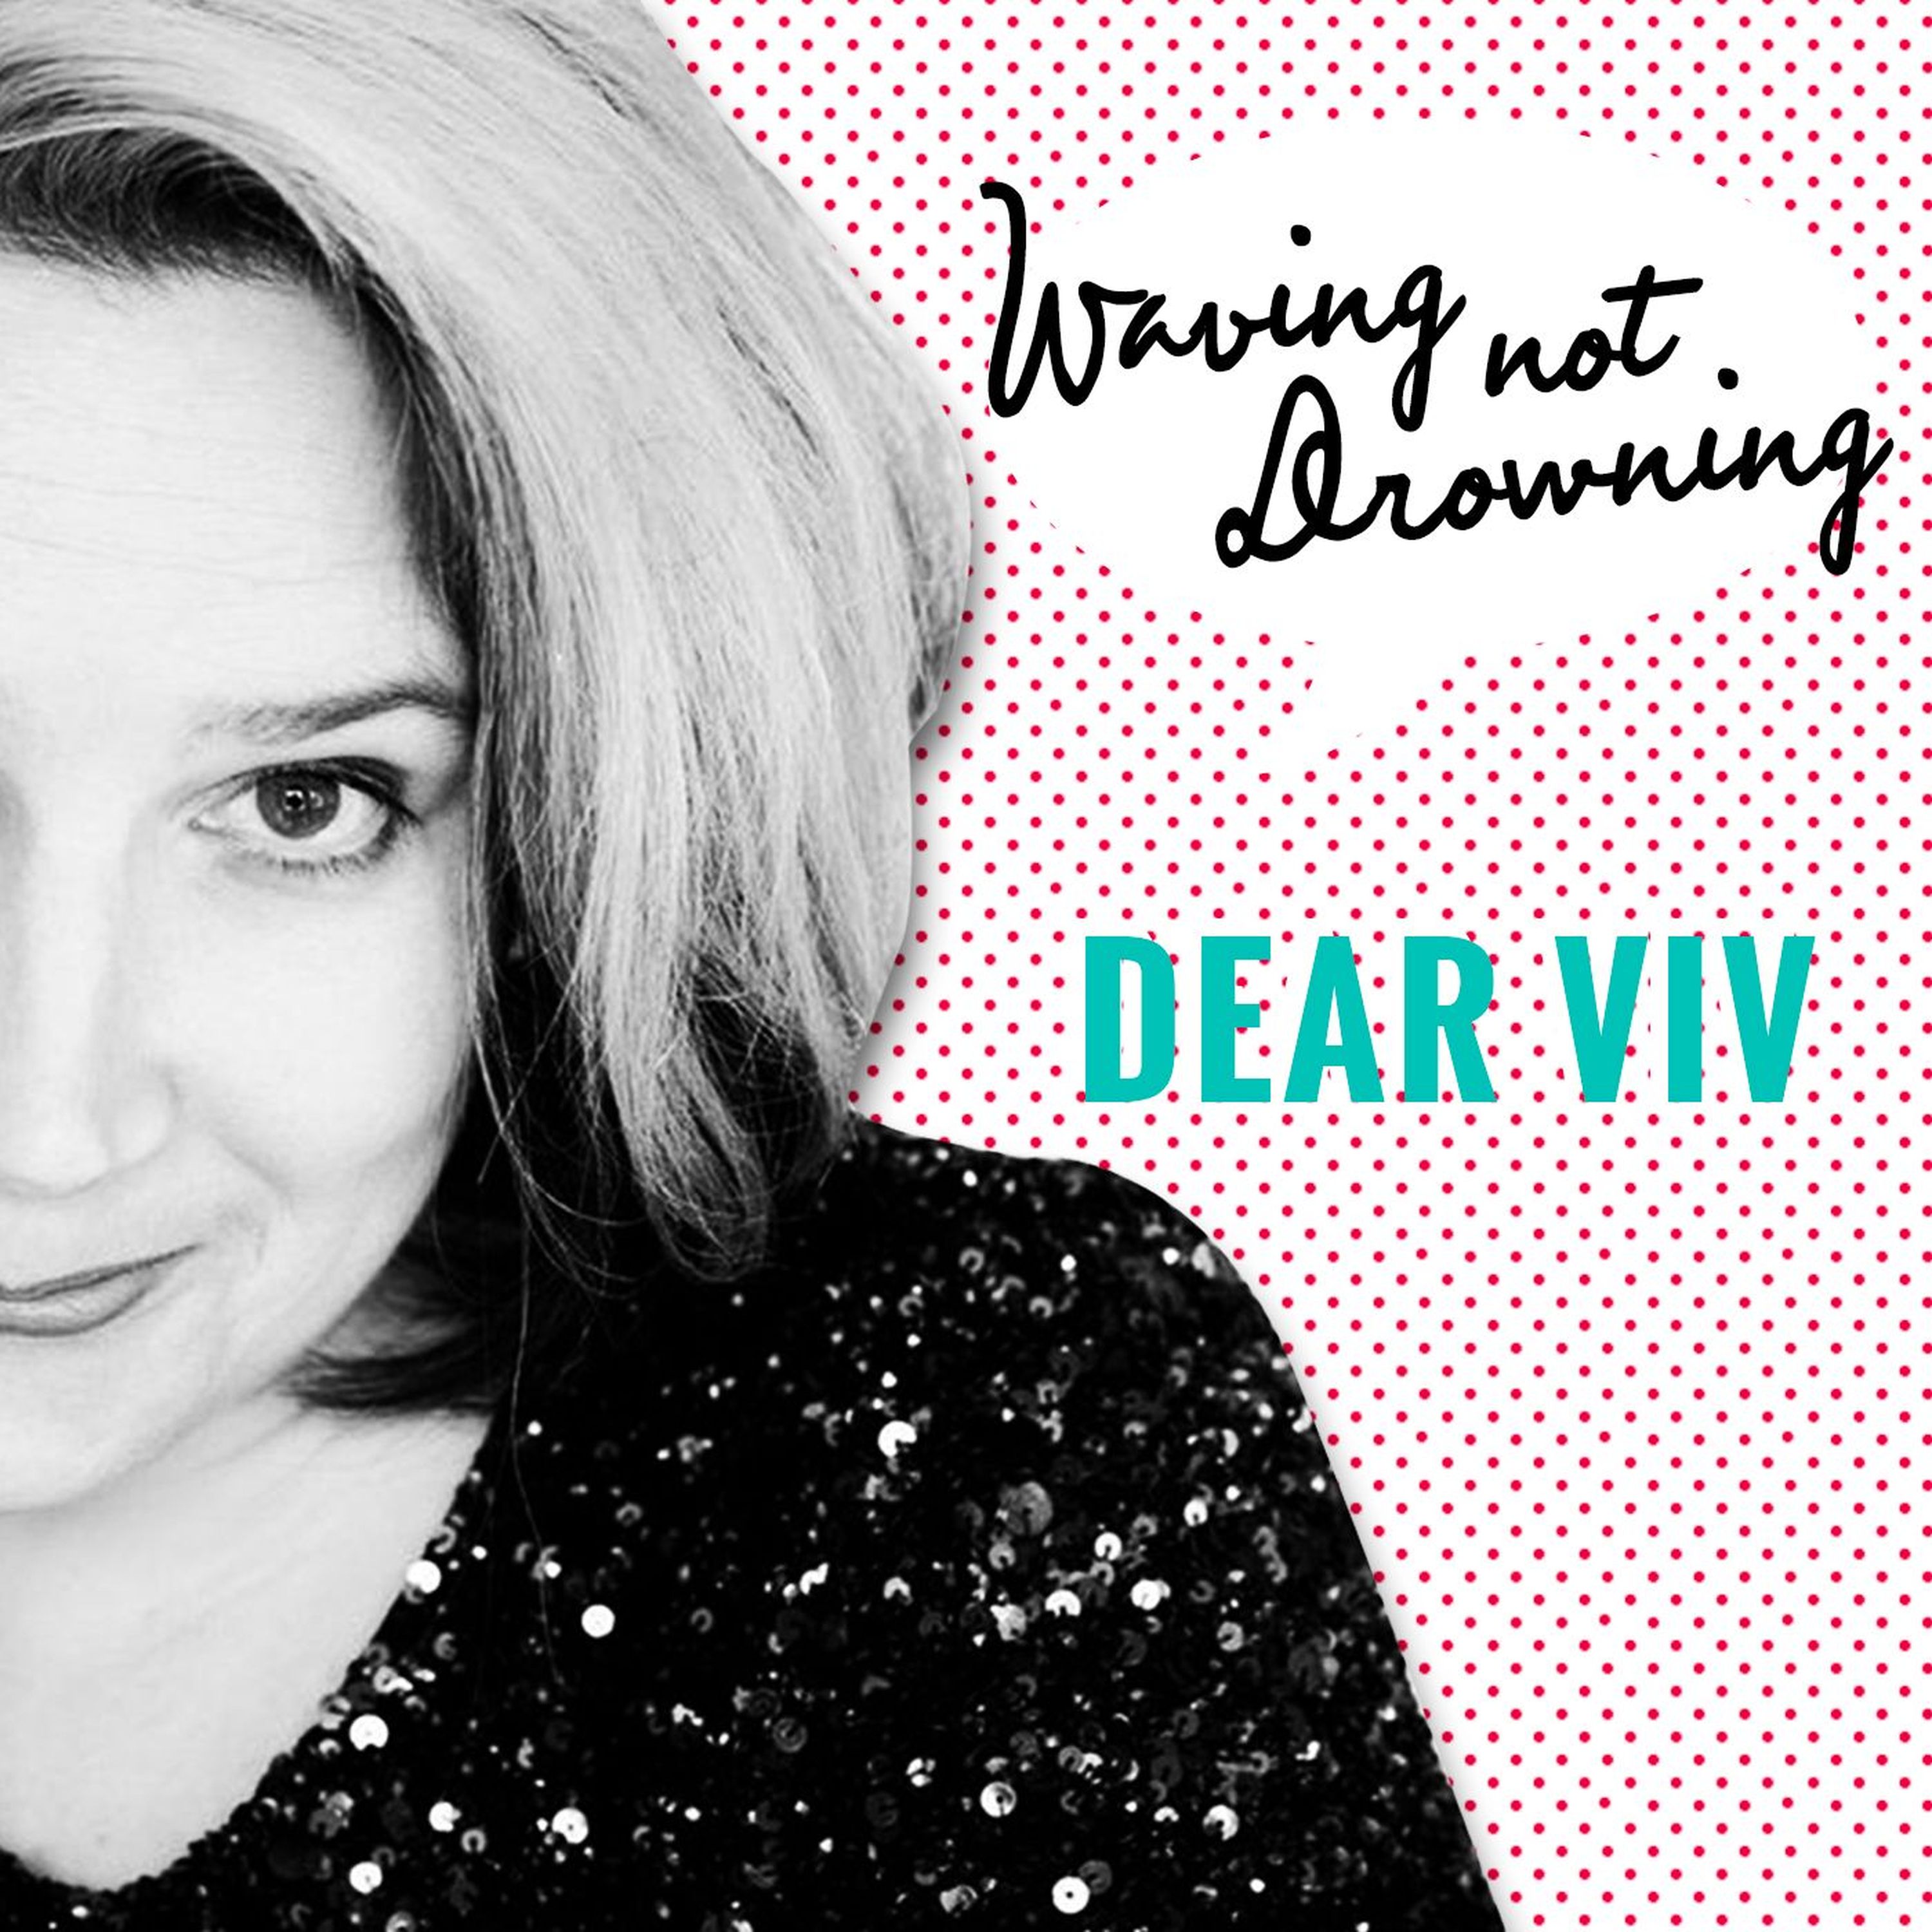 Dear Viv: My 7-year-old wants me to straighten her hair